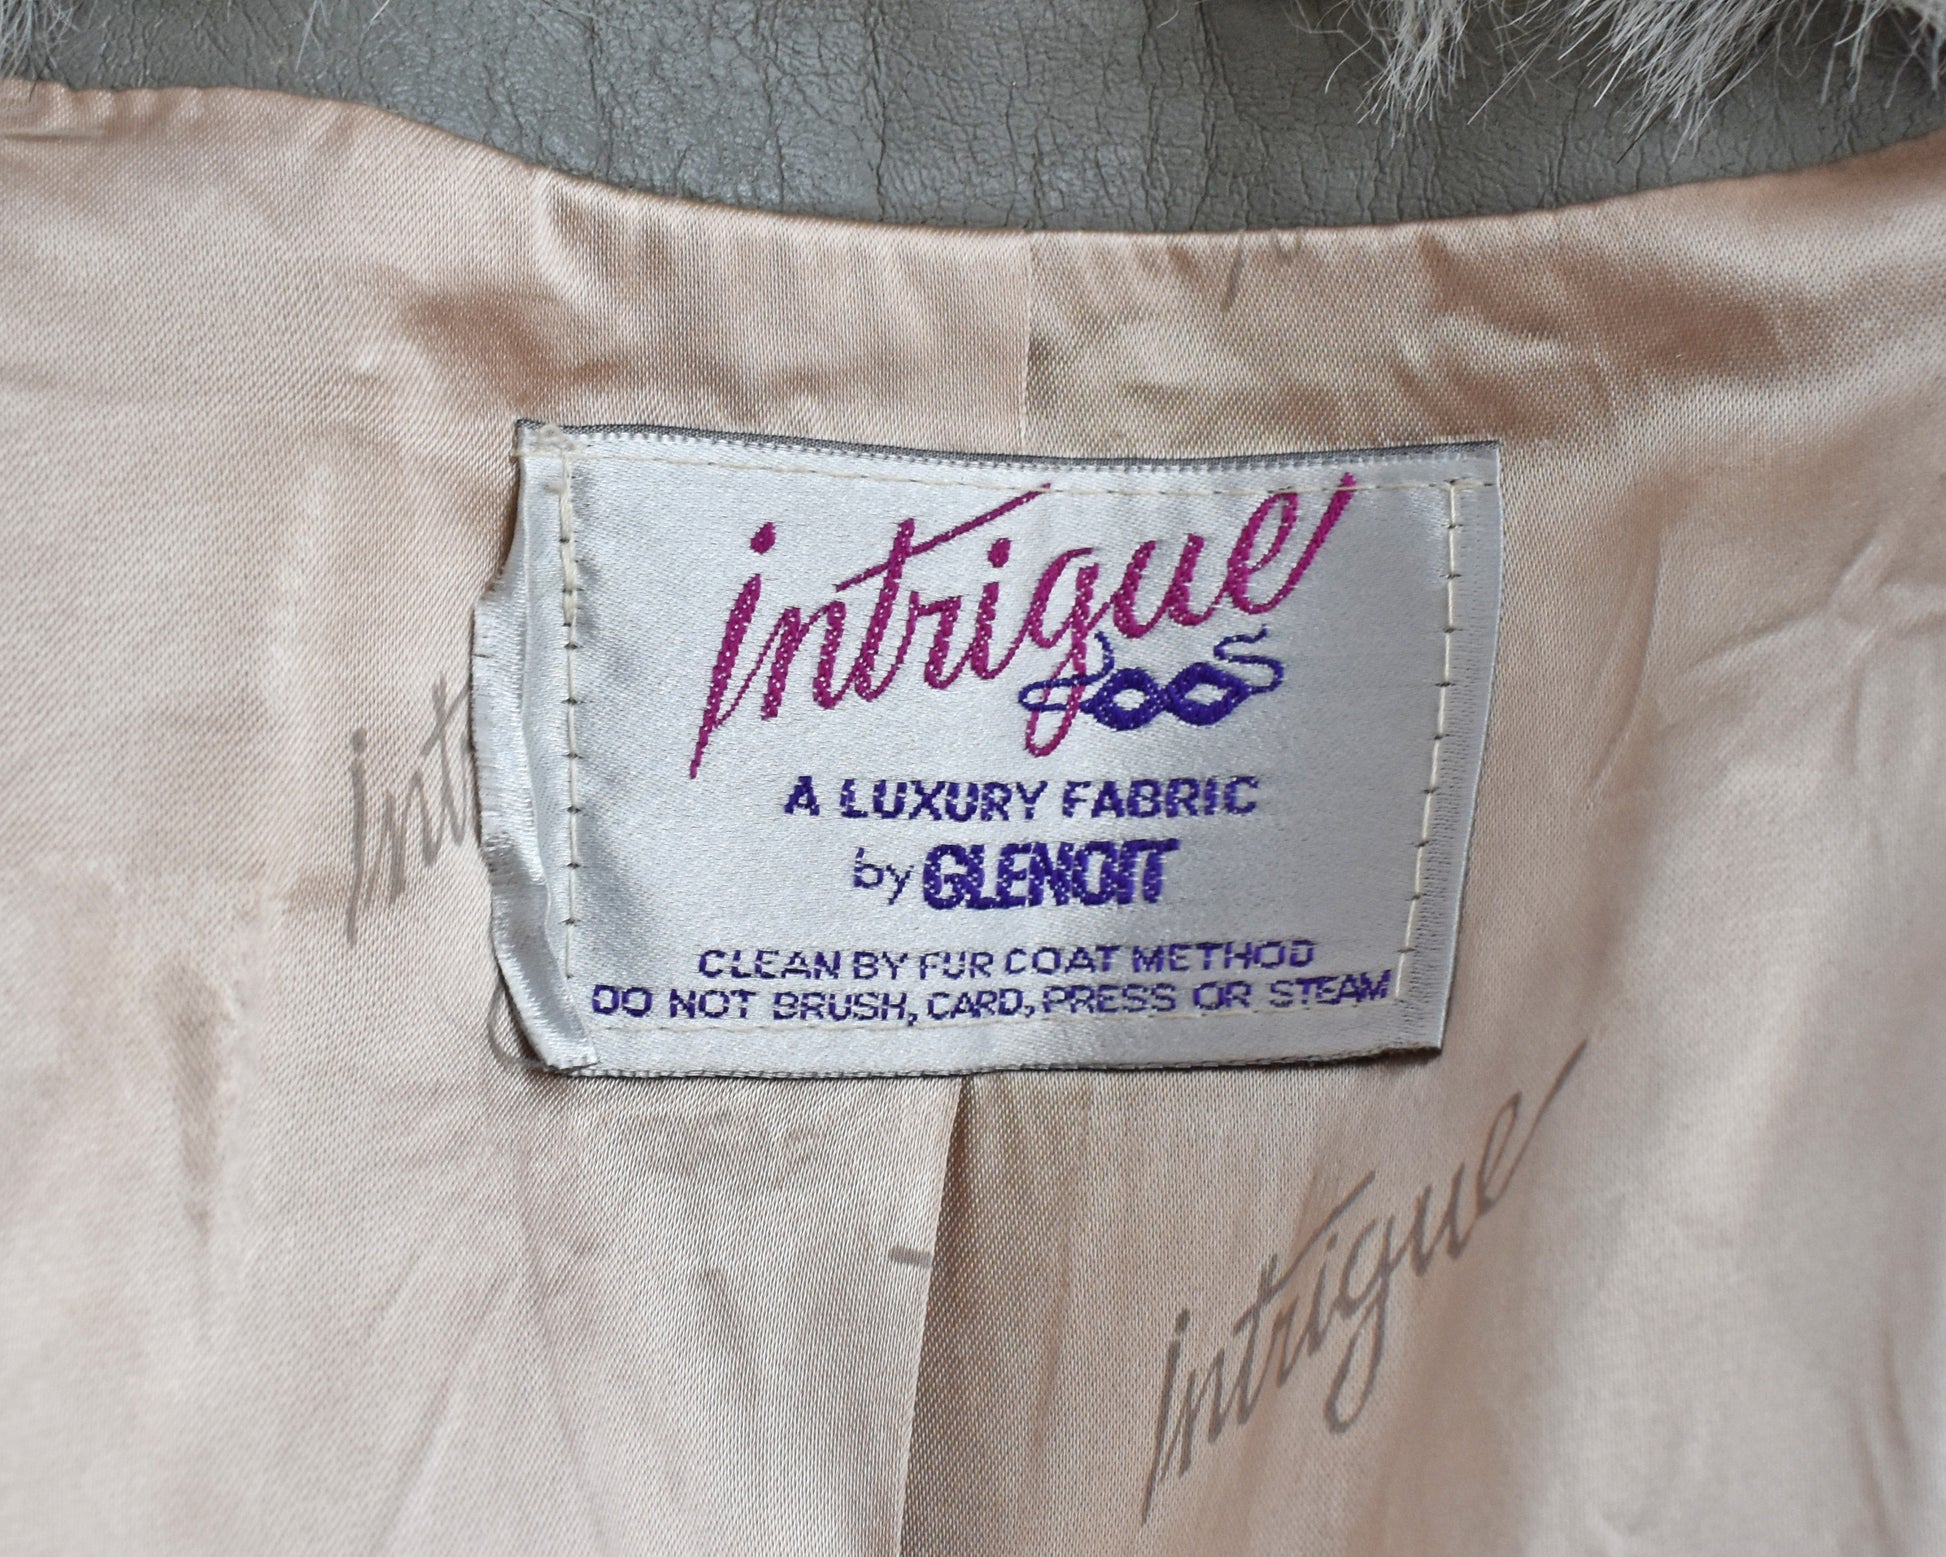 Close up of the tag which says Intrigue, a luxury fabric by Glenoit